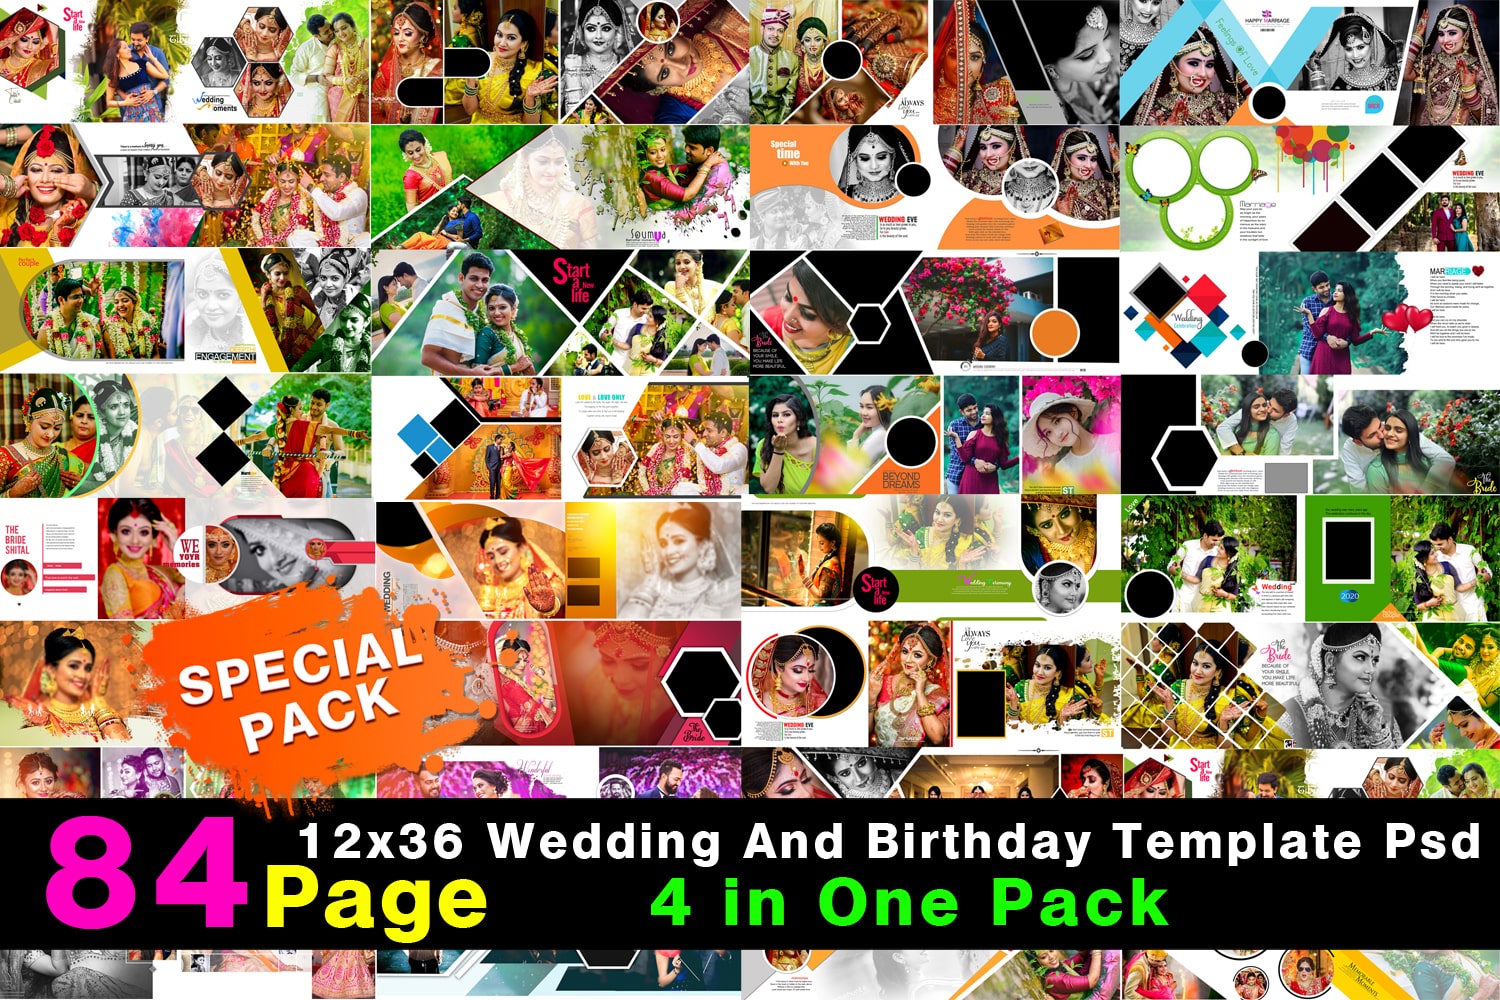 Wedding And Birthday Album Template Psd 2021-4 in One Pack (84 Page)